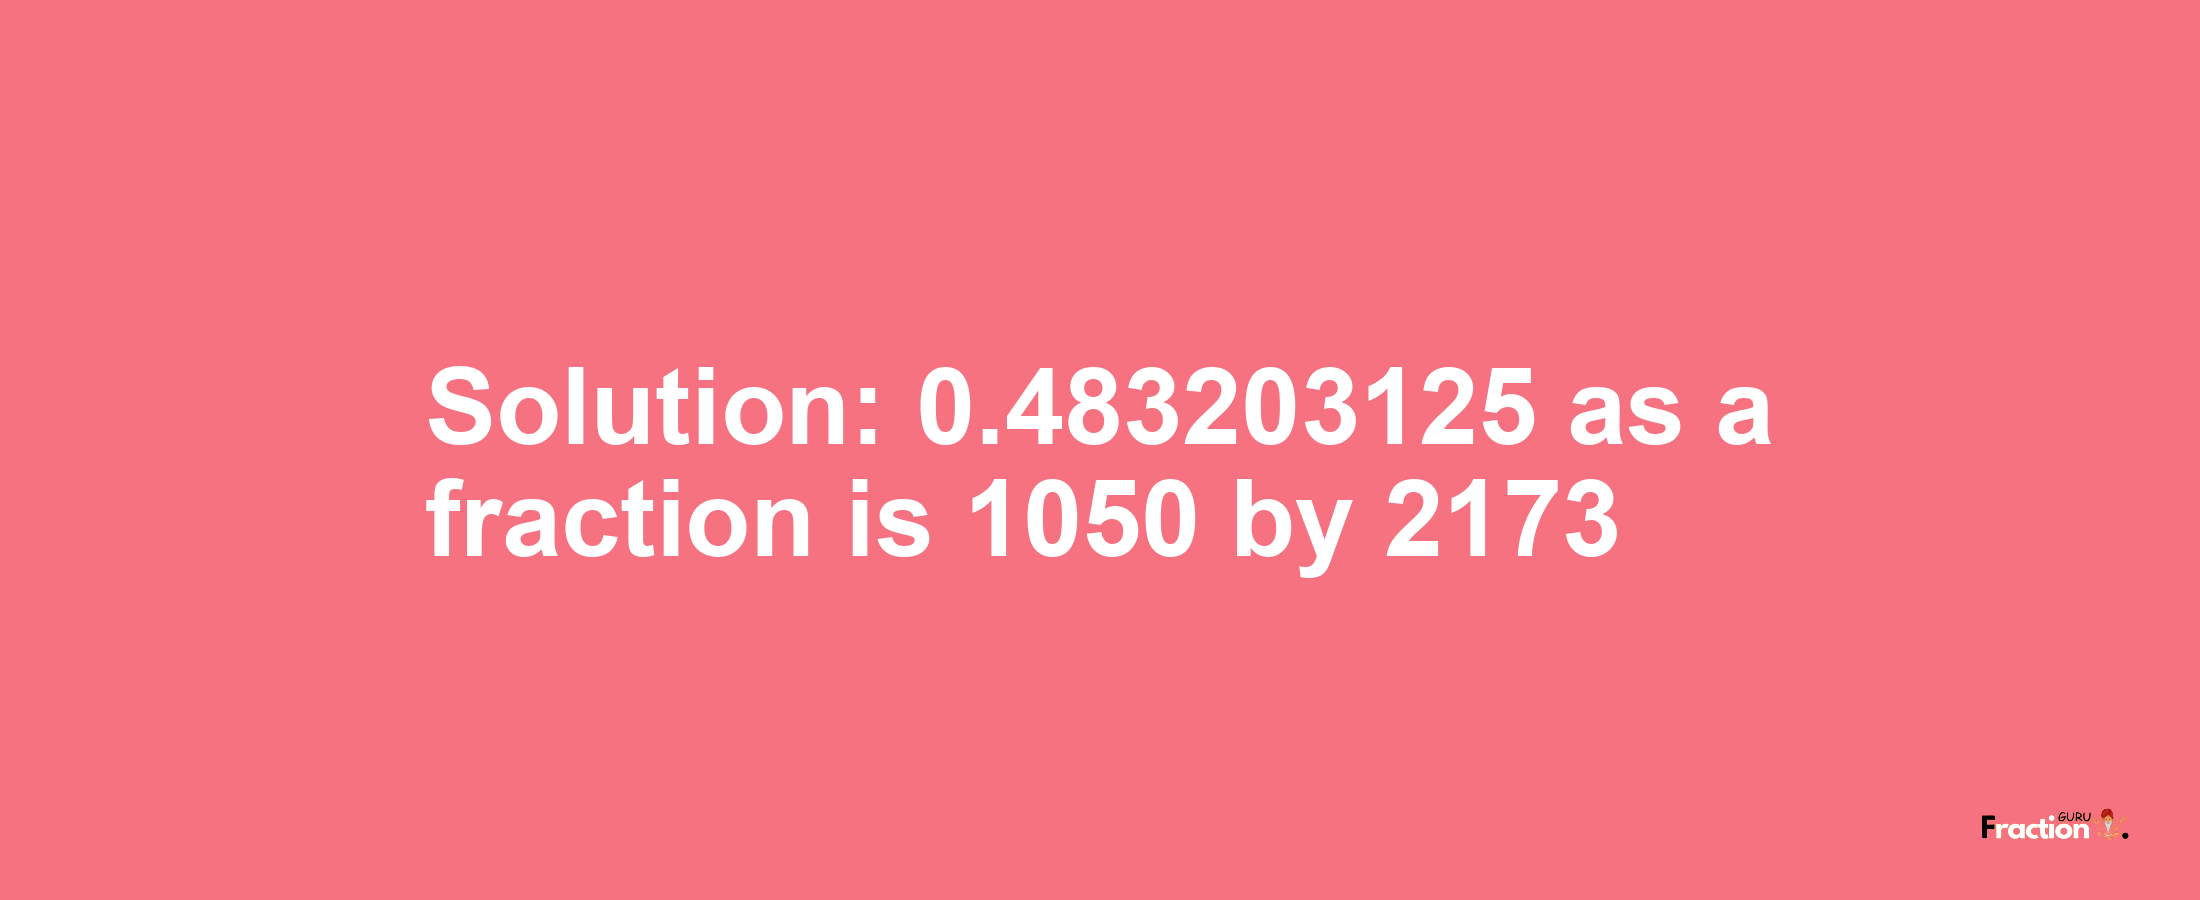 Solution:0.483203125 as a fraction is 1050/2173